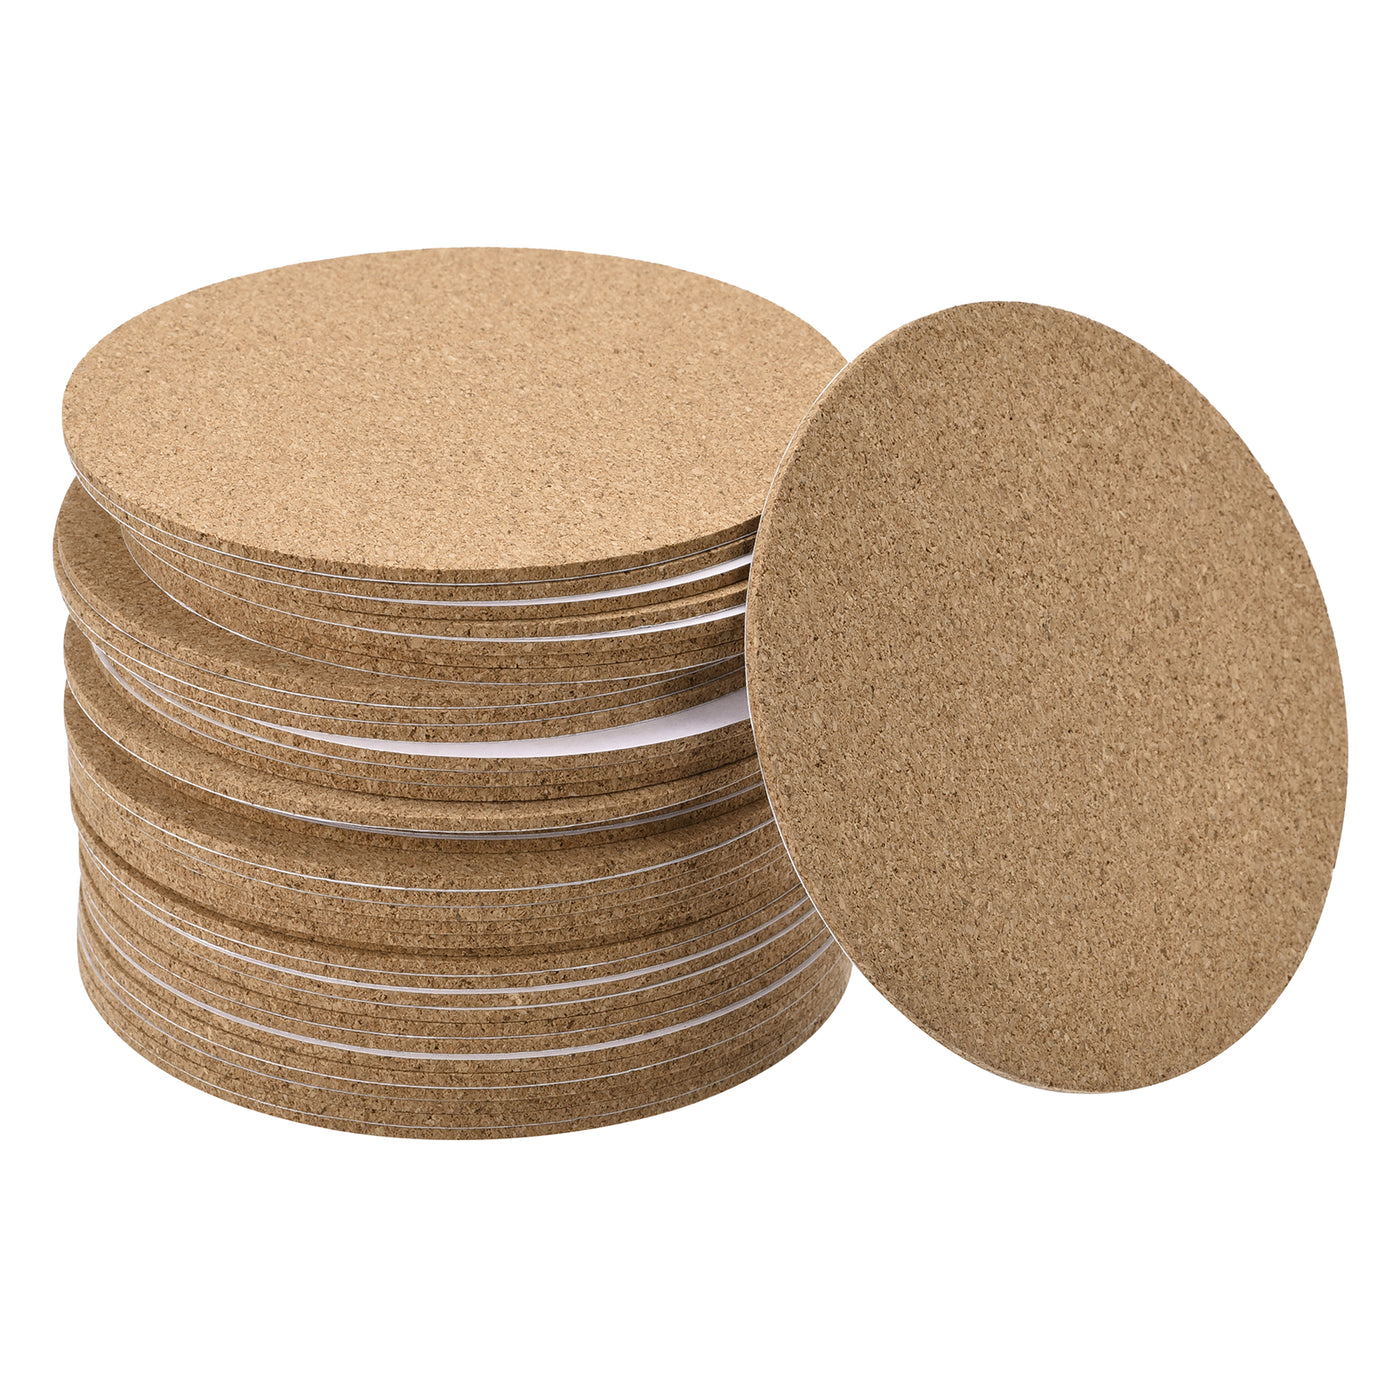 uxcell Uxcell 100mm(3.94") Round Coasters 2mm Thick Cork Cup Mat Self-Adhesive Pad 36pcs